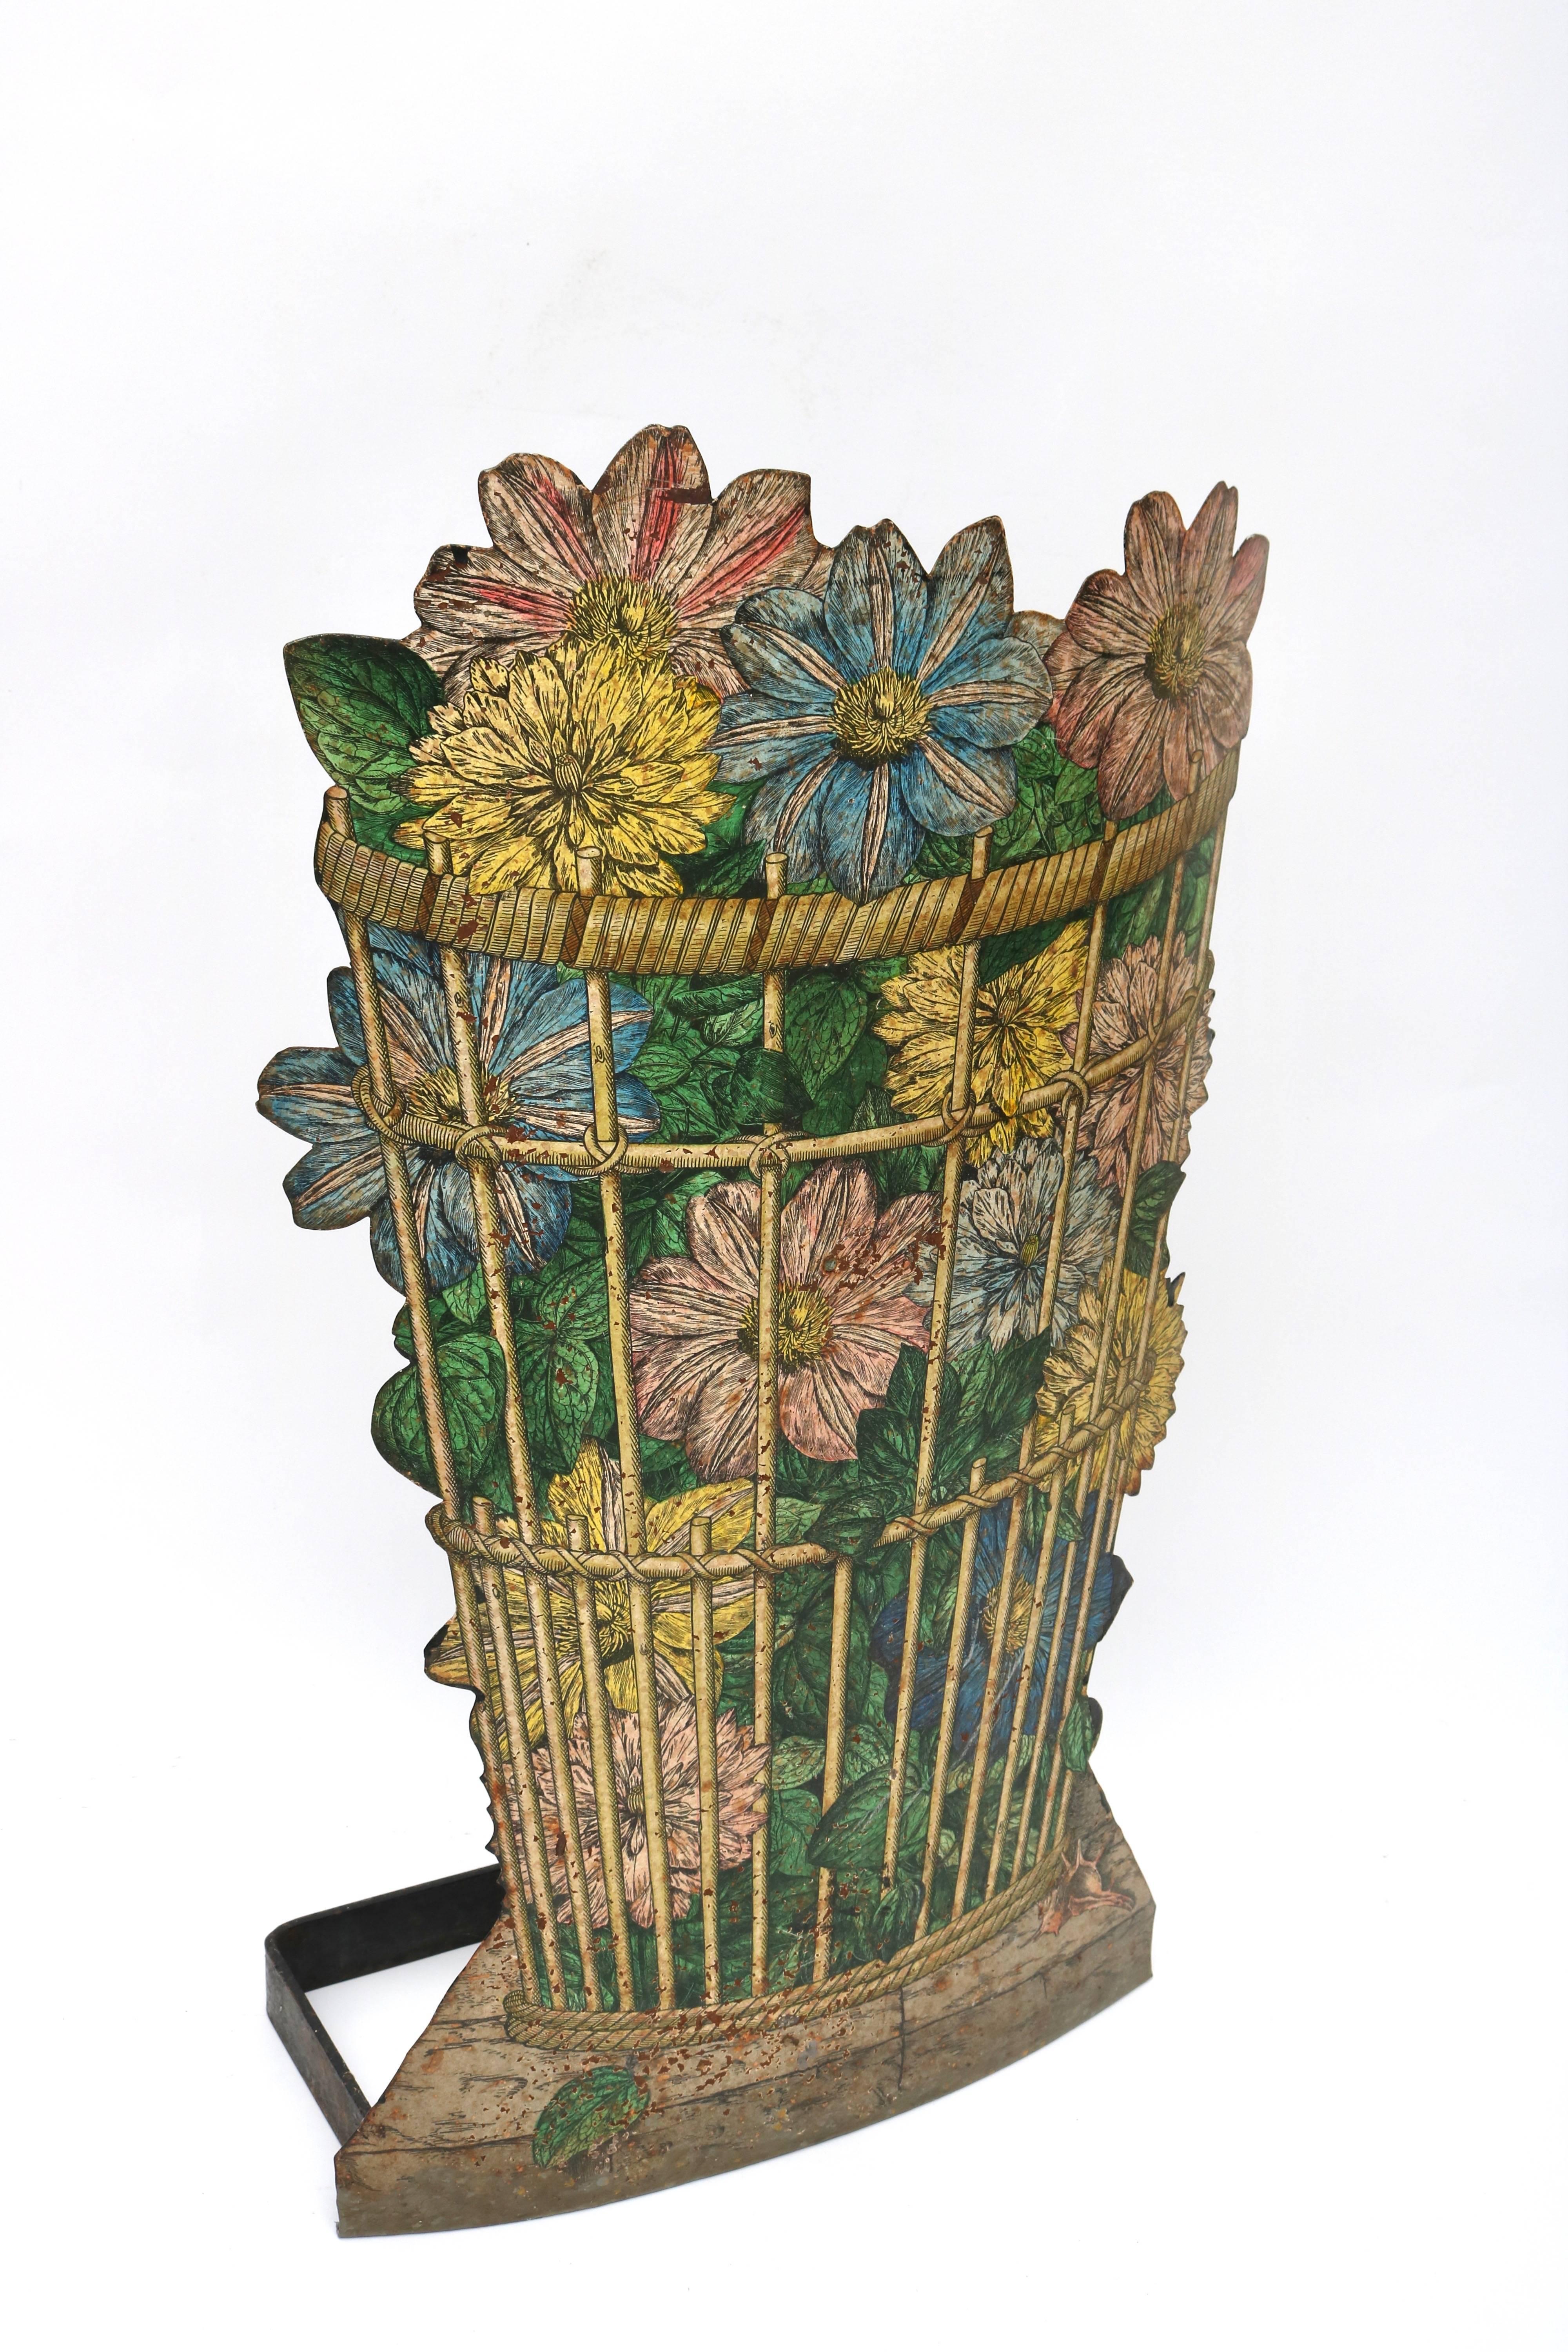 This stylish Fornasetti umbrella stand was created in the late 1950s-1960s and will make the perfect addition for your entry foyer or perhaps mud-room. 

For best net trade price or additional questions regarding this item, please click the